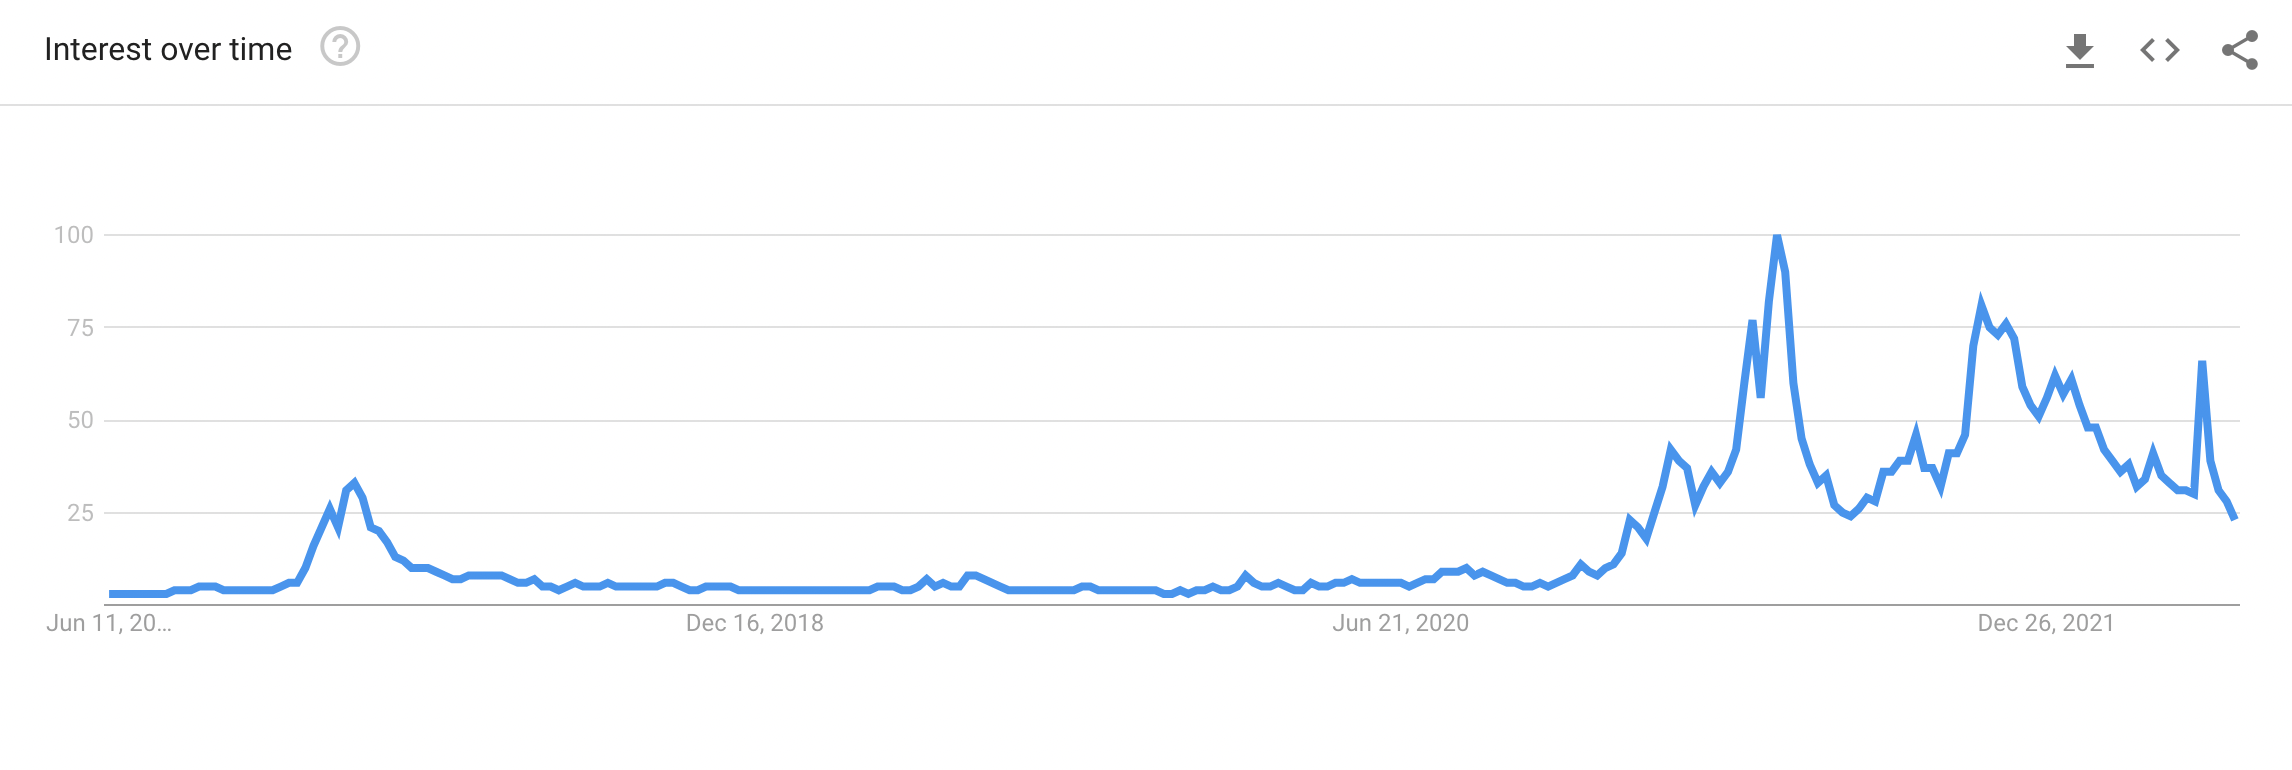 Worldwide interest for “crypto” in the past five years, according to Google Trend Explore